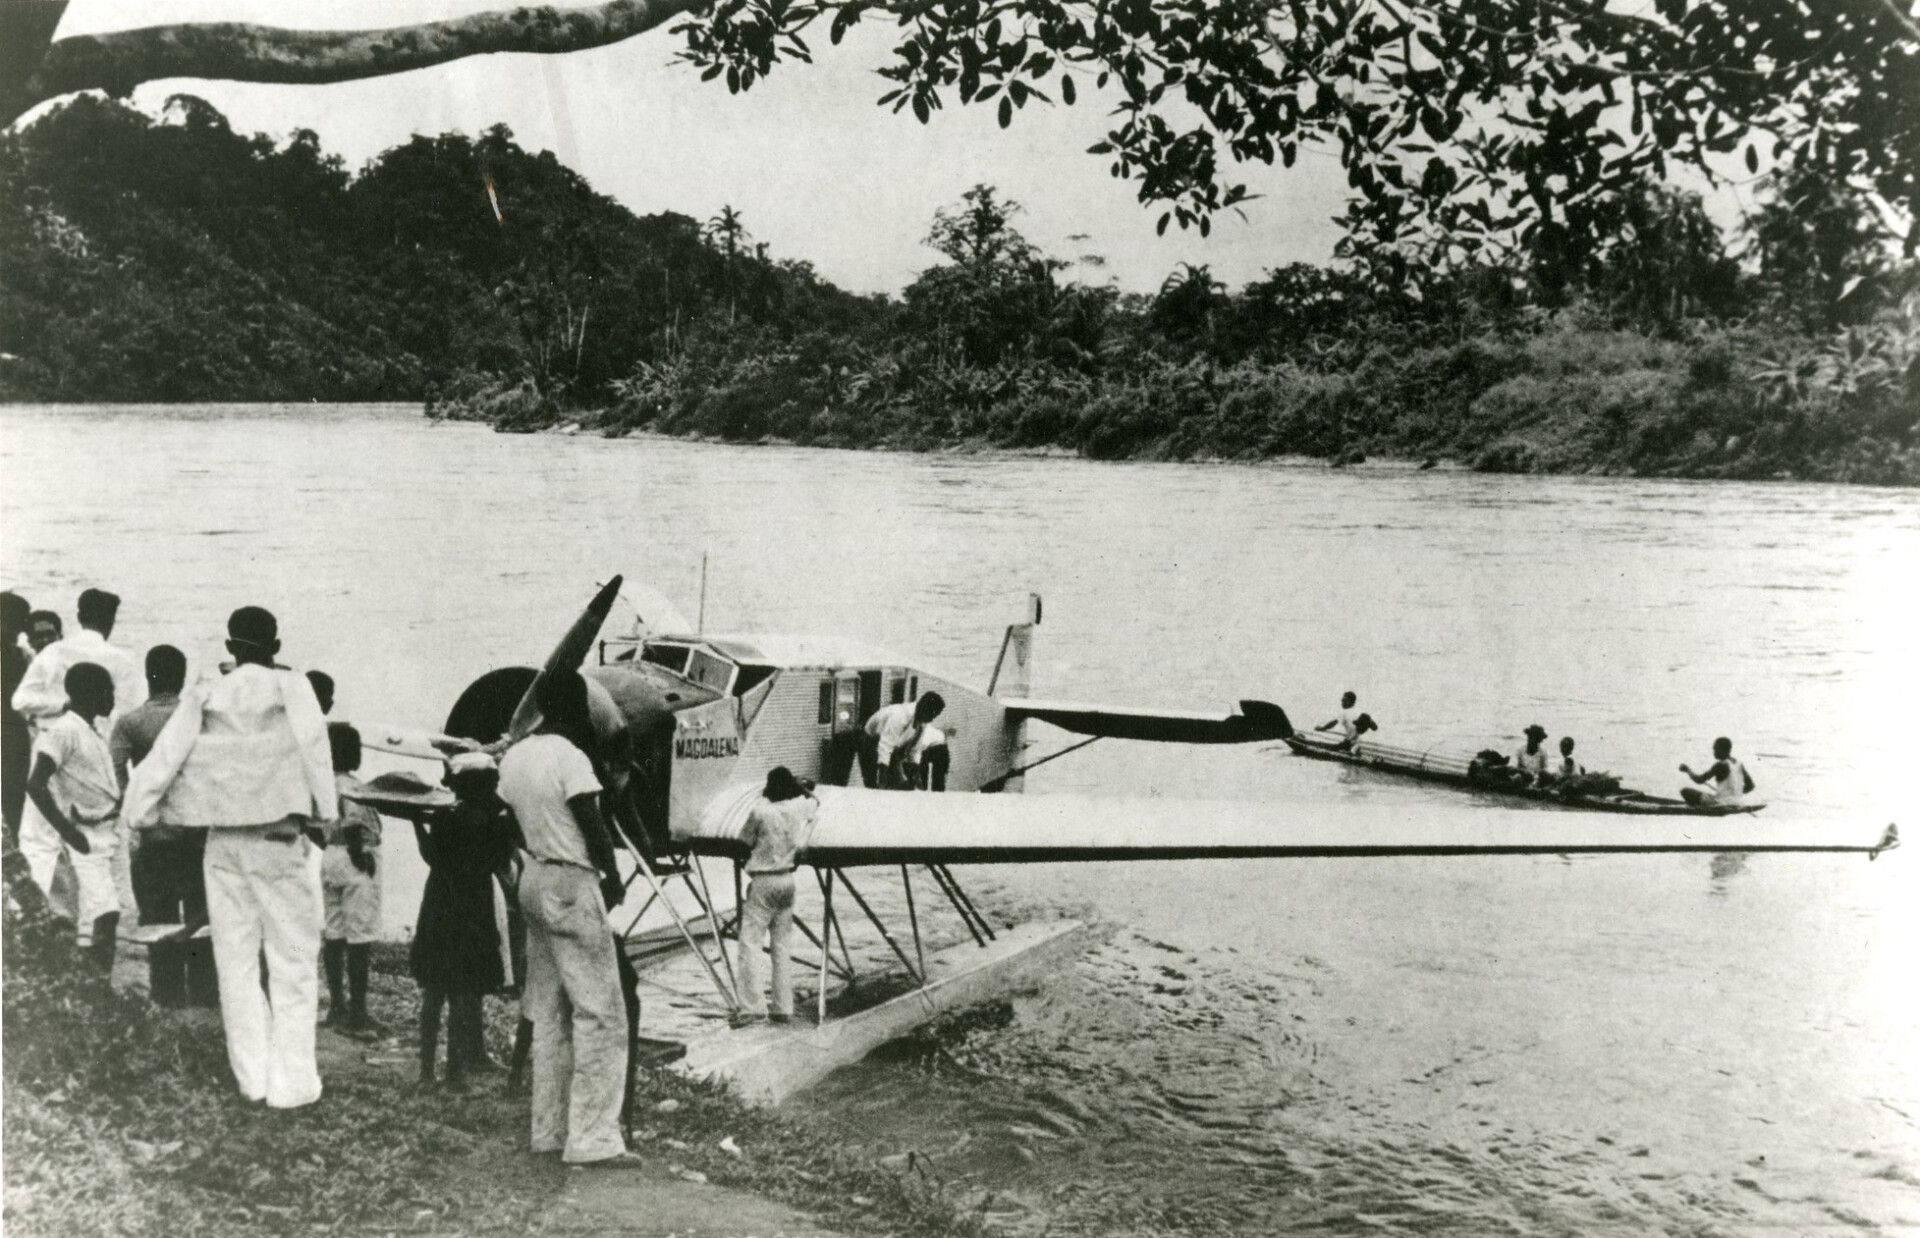 A Junkers W 34 parked in water surrounded by people.